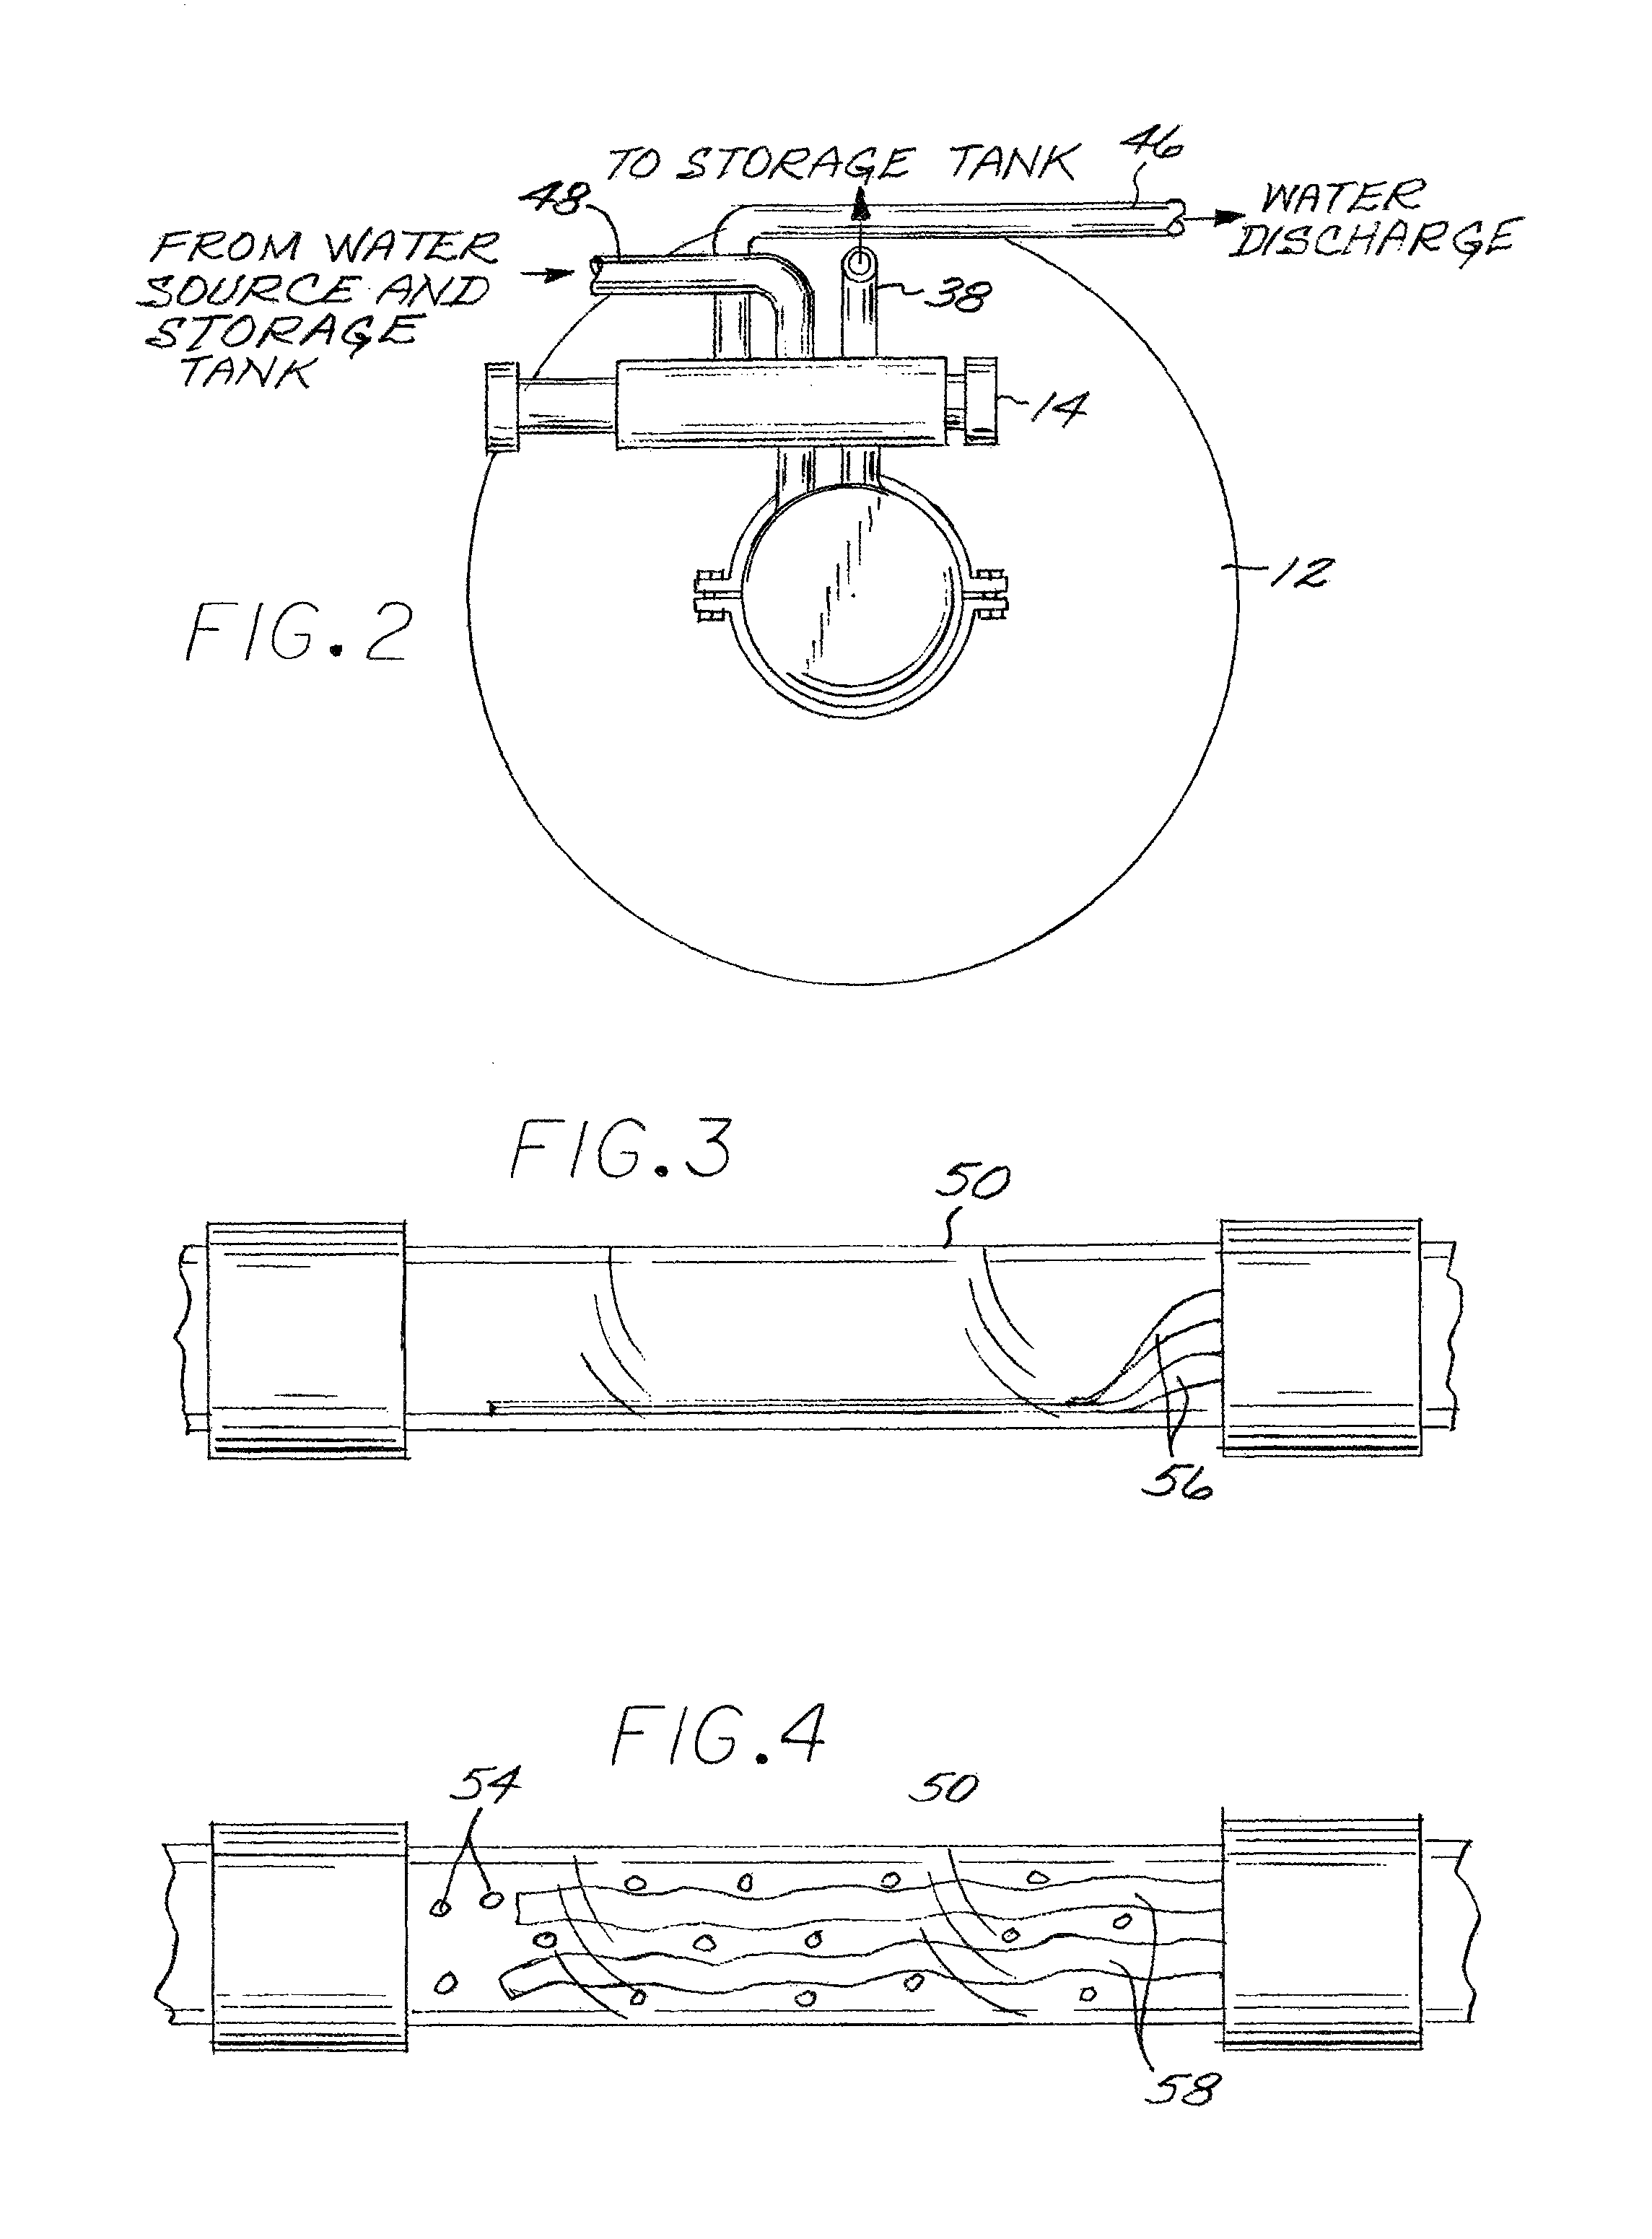 Ozonating water treatment and filtration apparatus